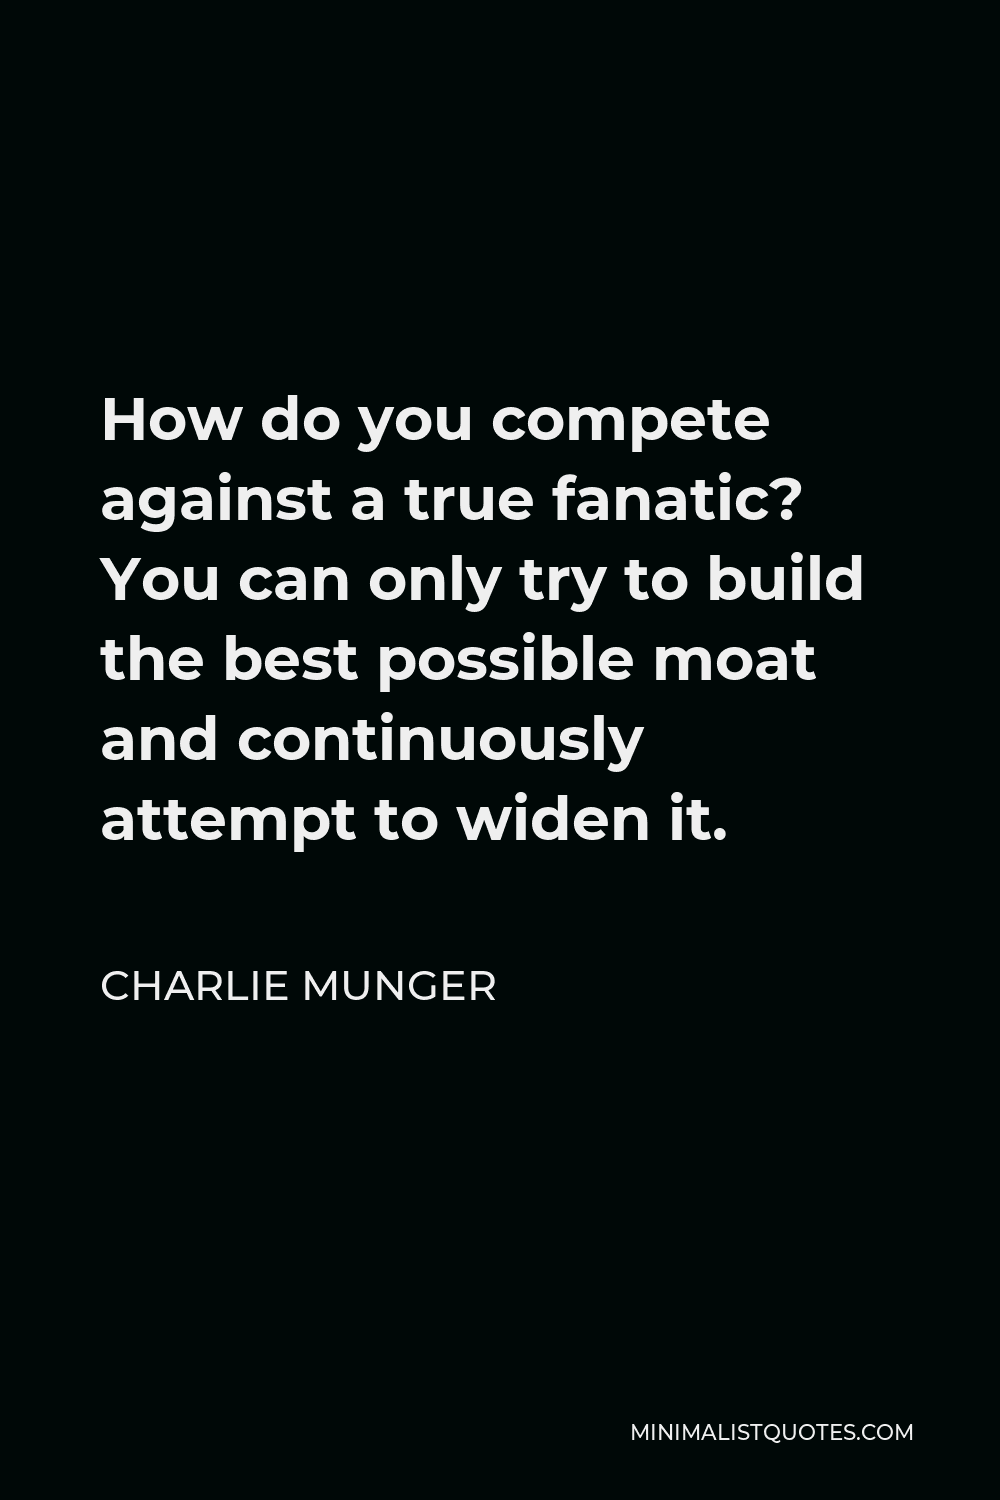 Charlie Munger Quote - How do you compete against a true fanatic? You can only try to build the best possible moat and continuously attempt to widen it.